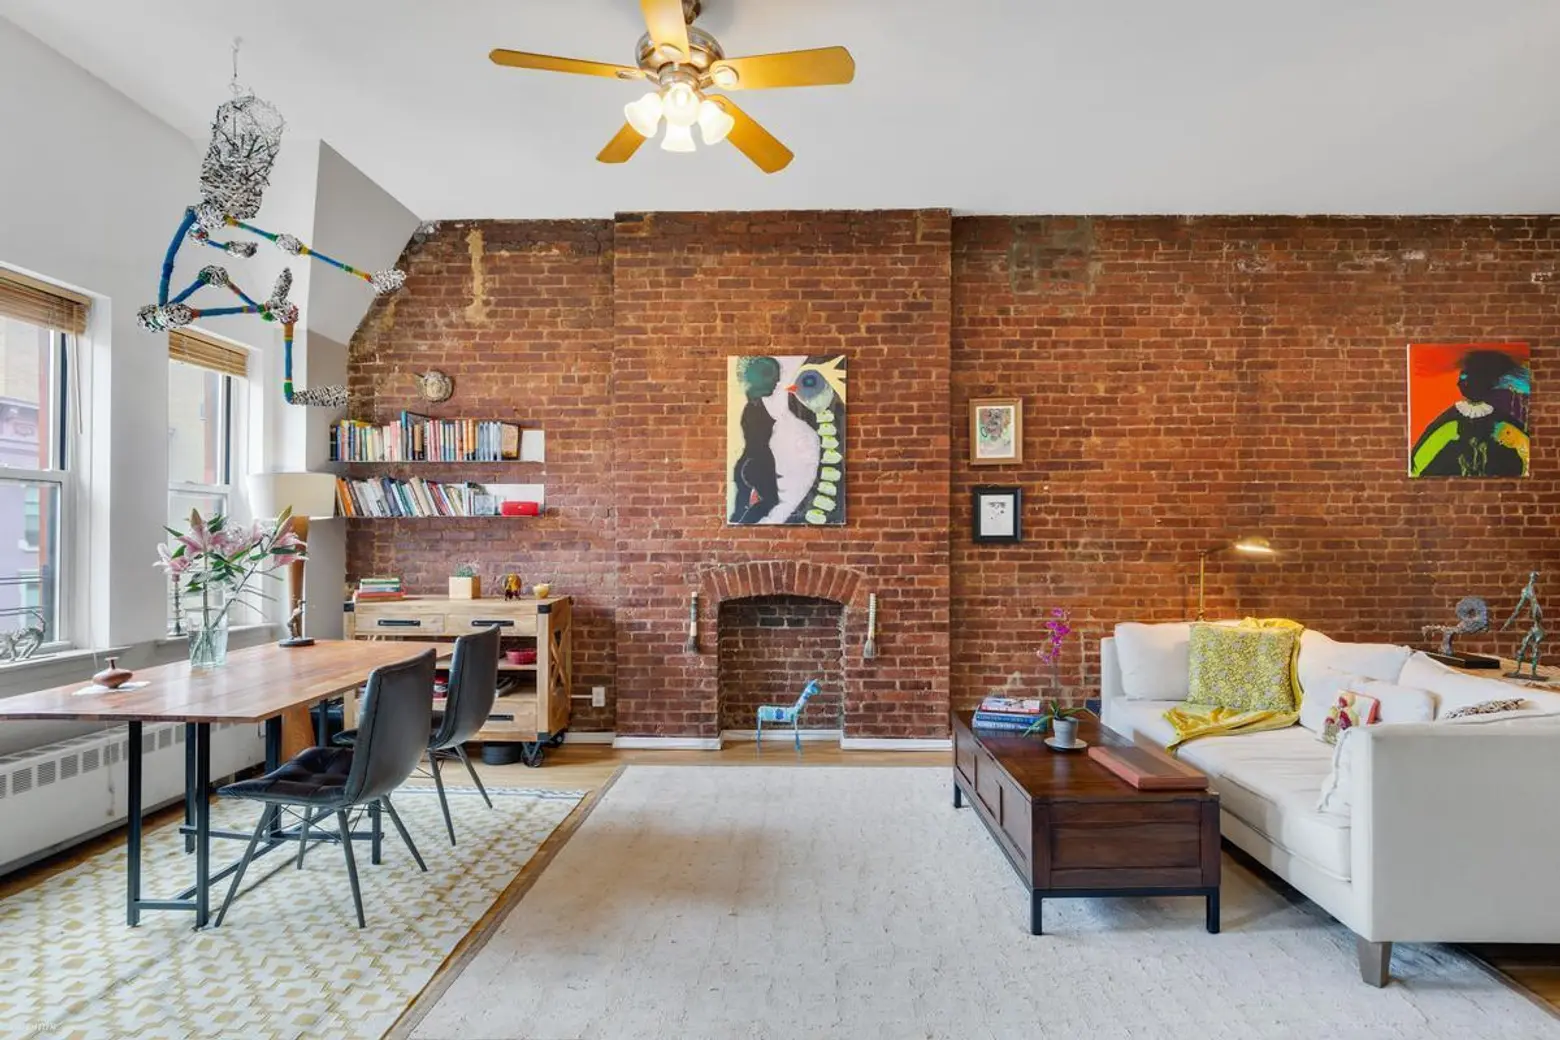 $750K brownstone aerie on the Upper West Side has classic Manhattan charm–and an elevator